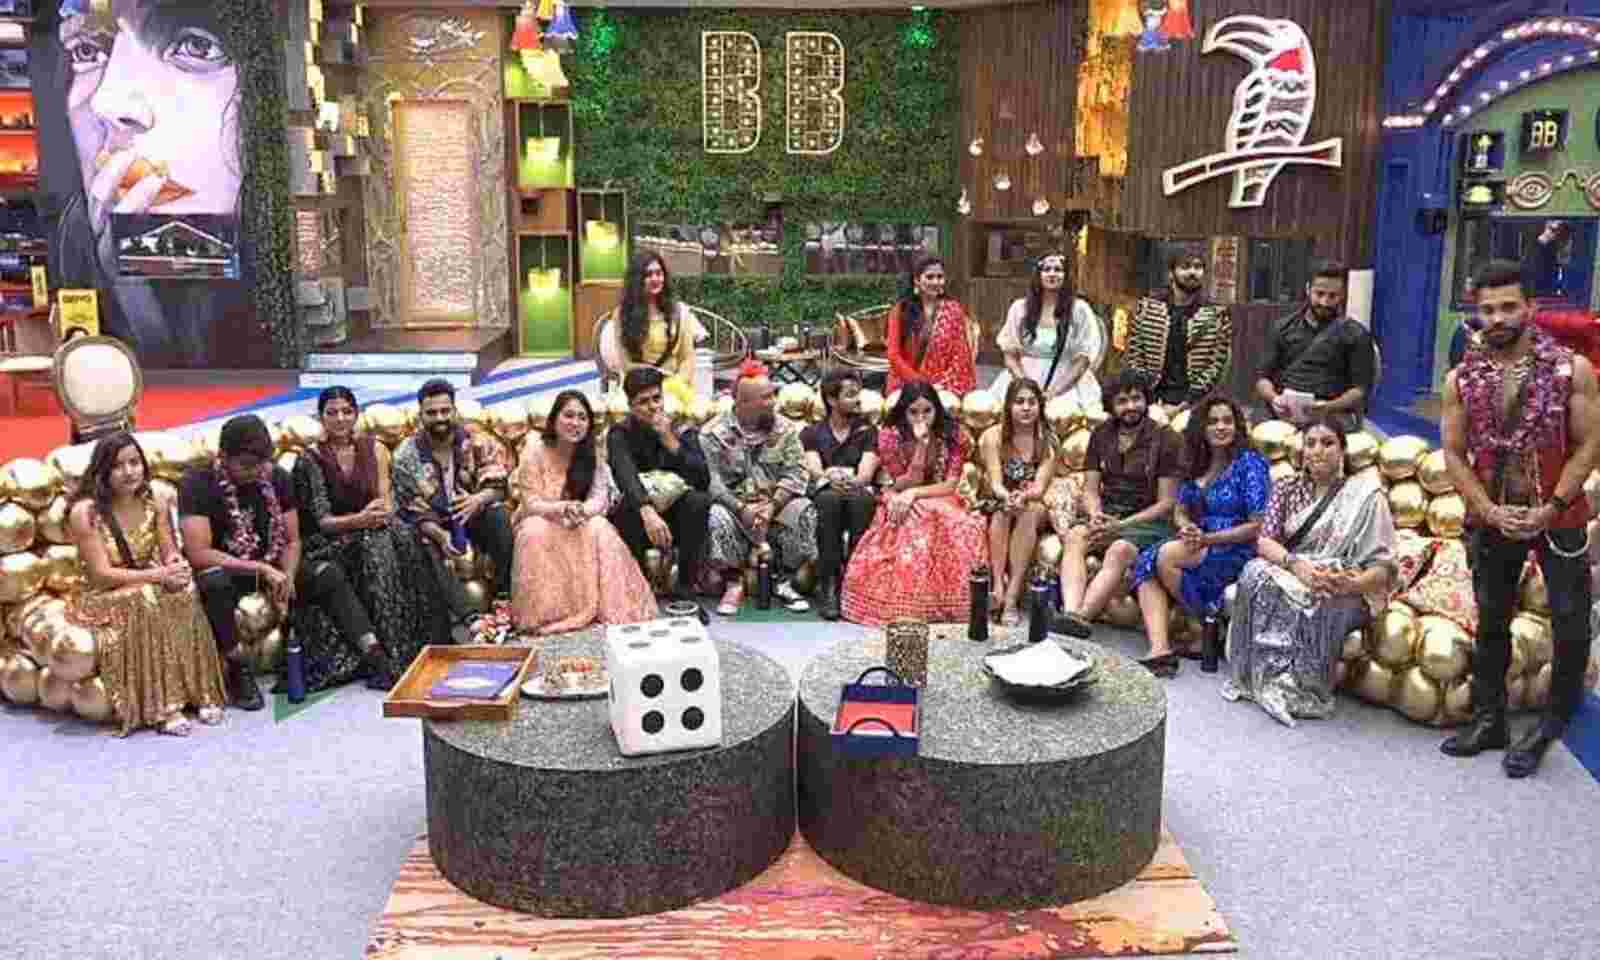 Eight contestants in nominations for fourth week elimination